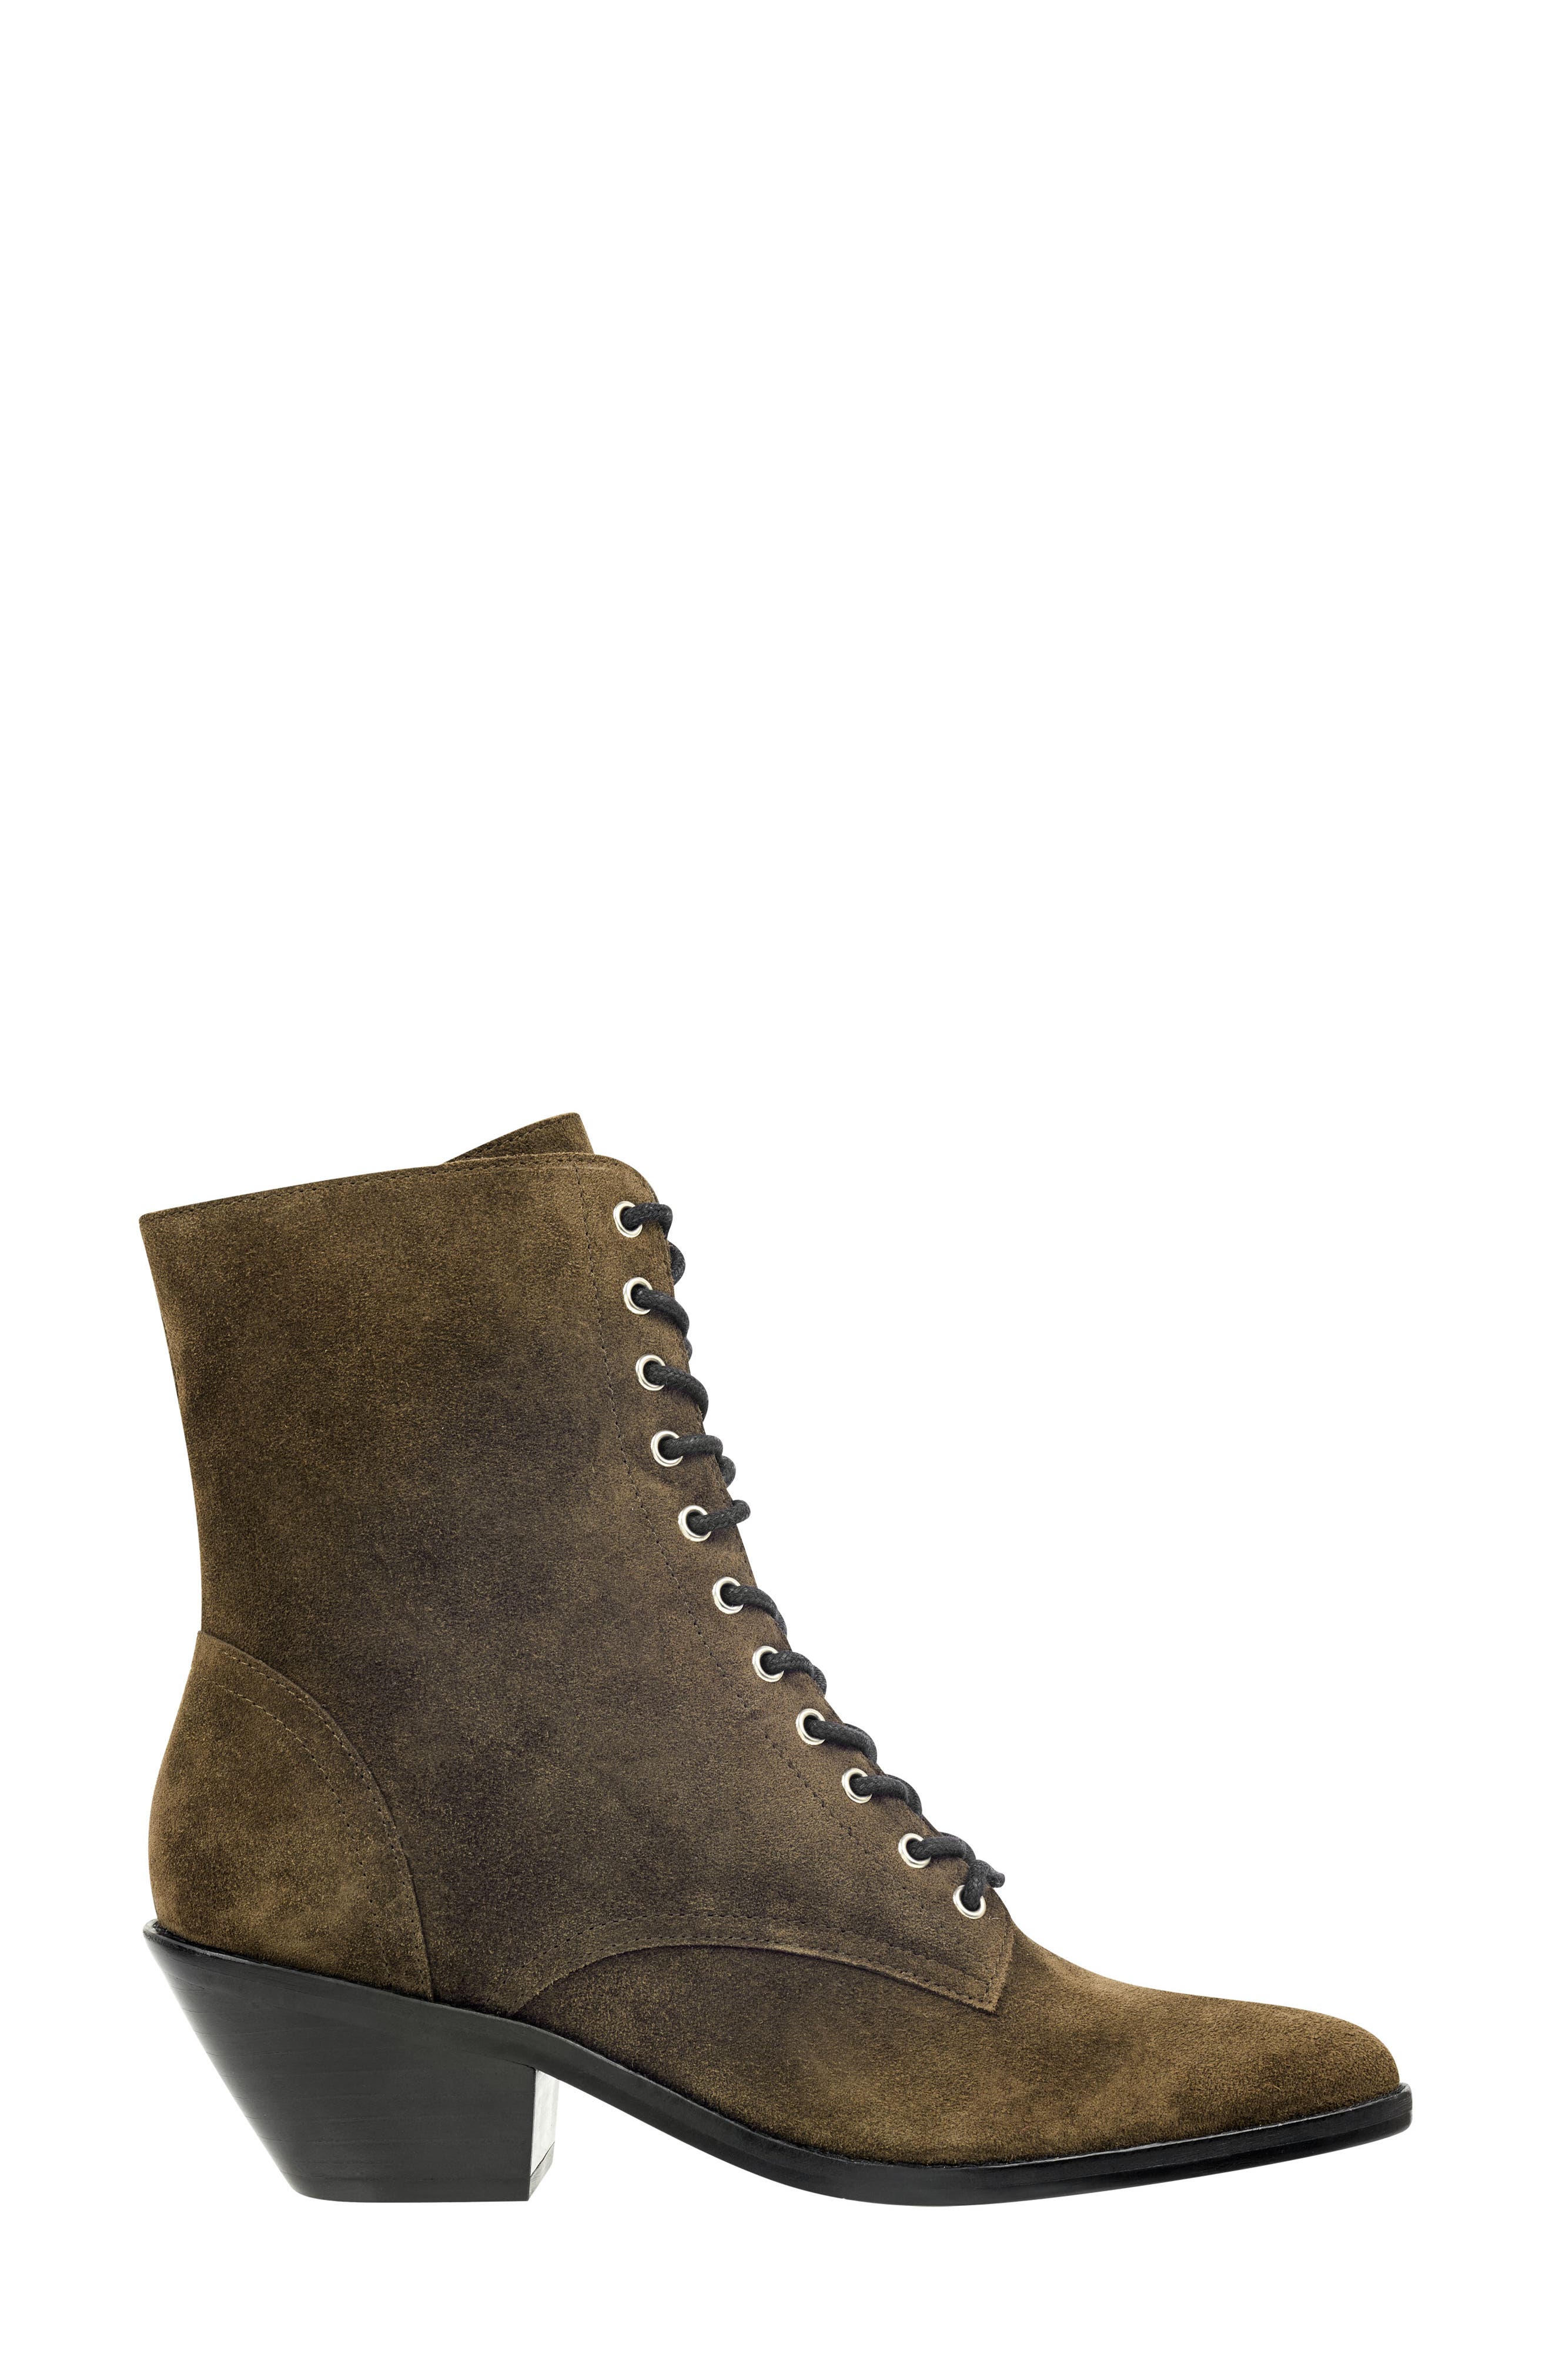 Marc Fisher LTD | Bowie Lace-Up Boot 